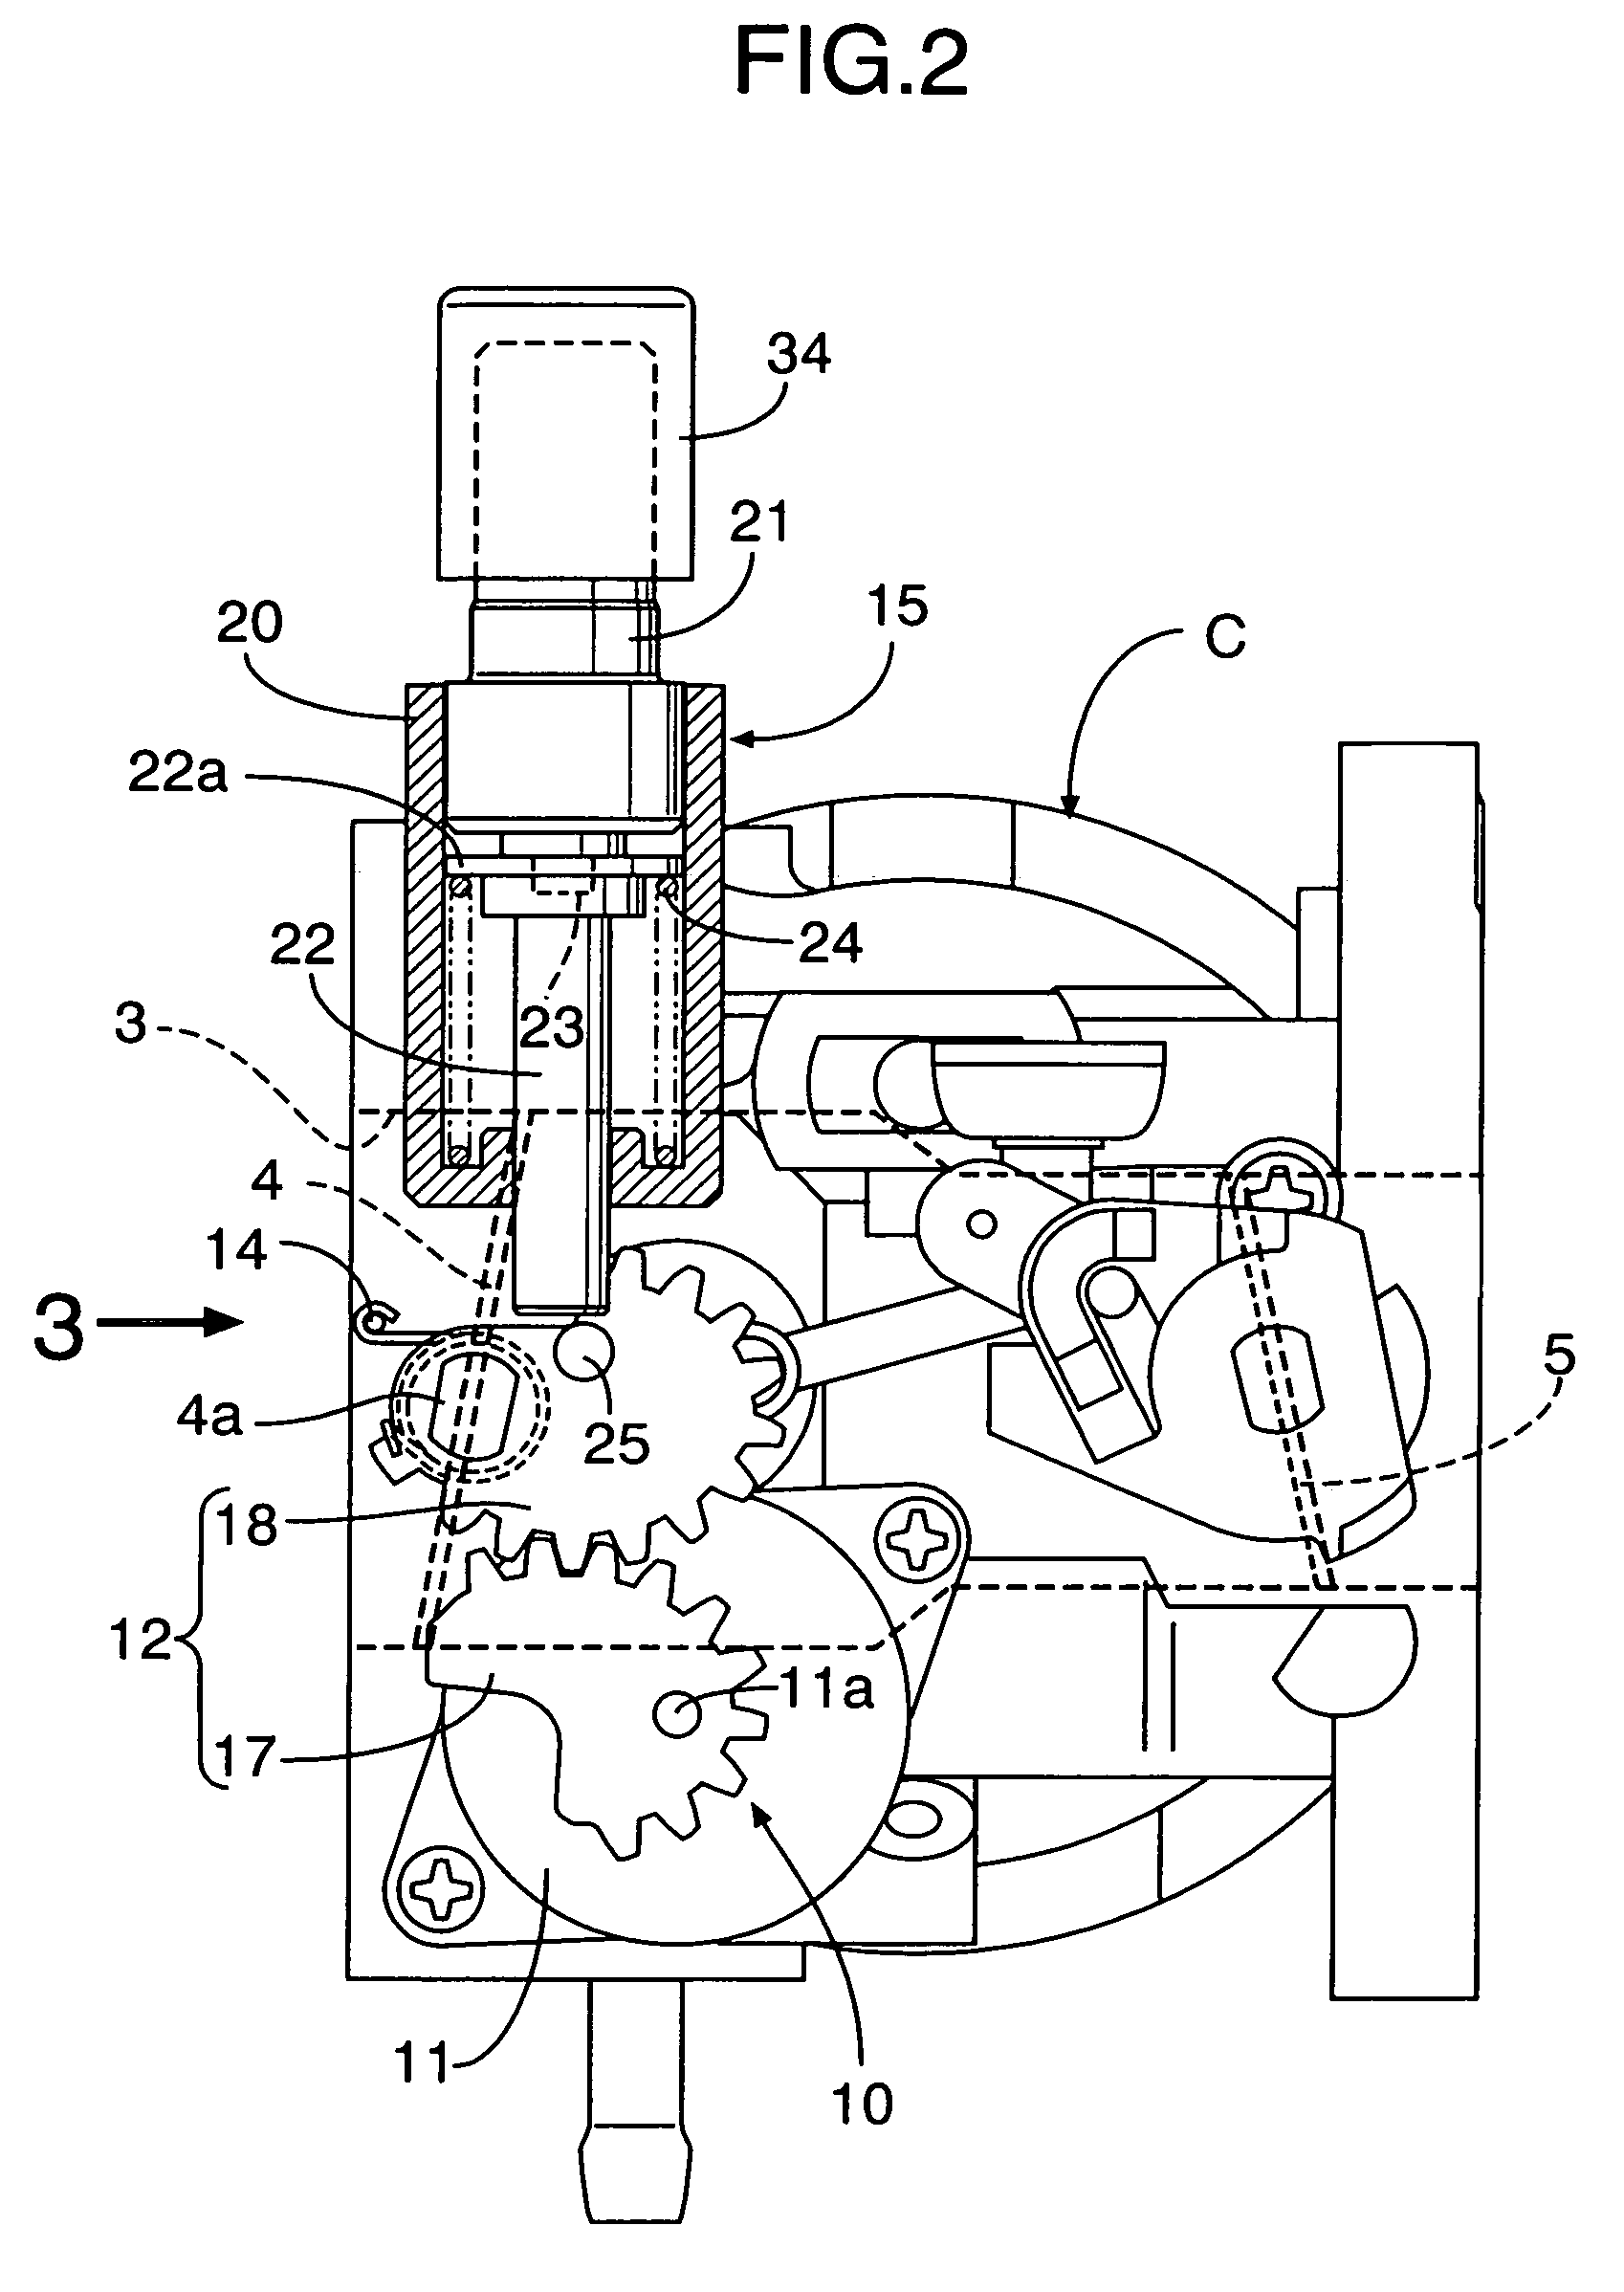 Carburetor electrically-operated automatic choke system